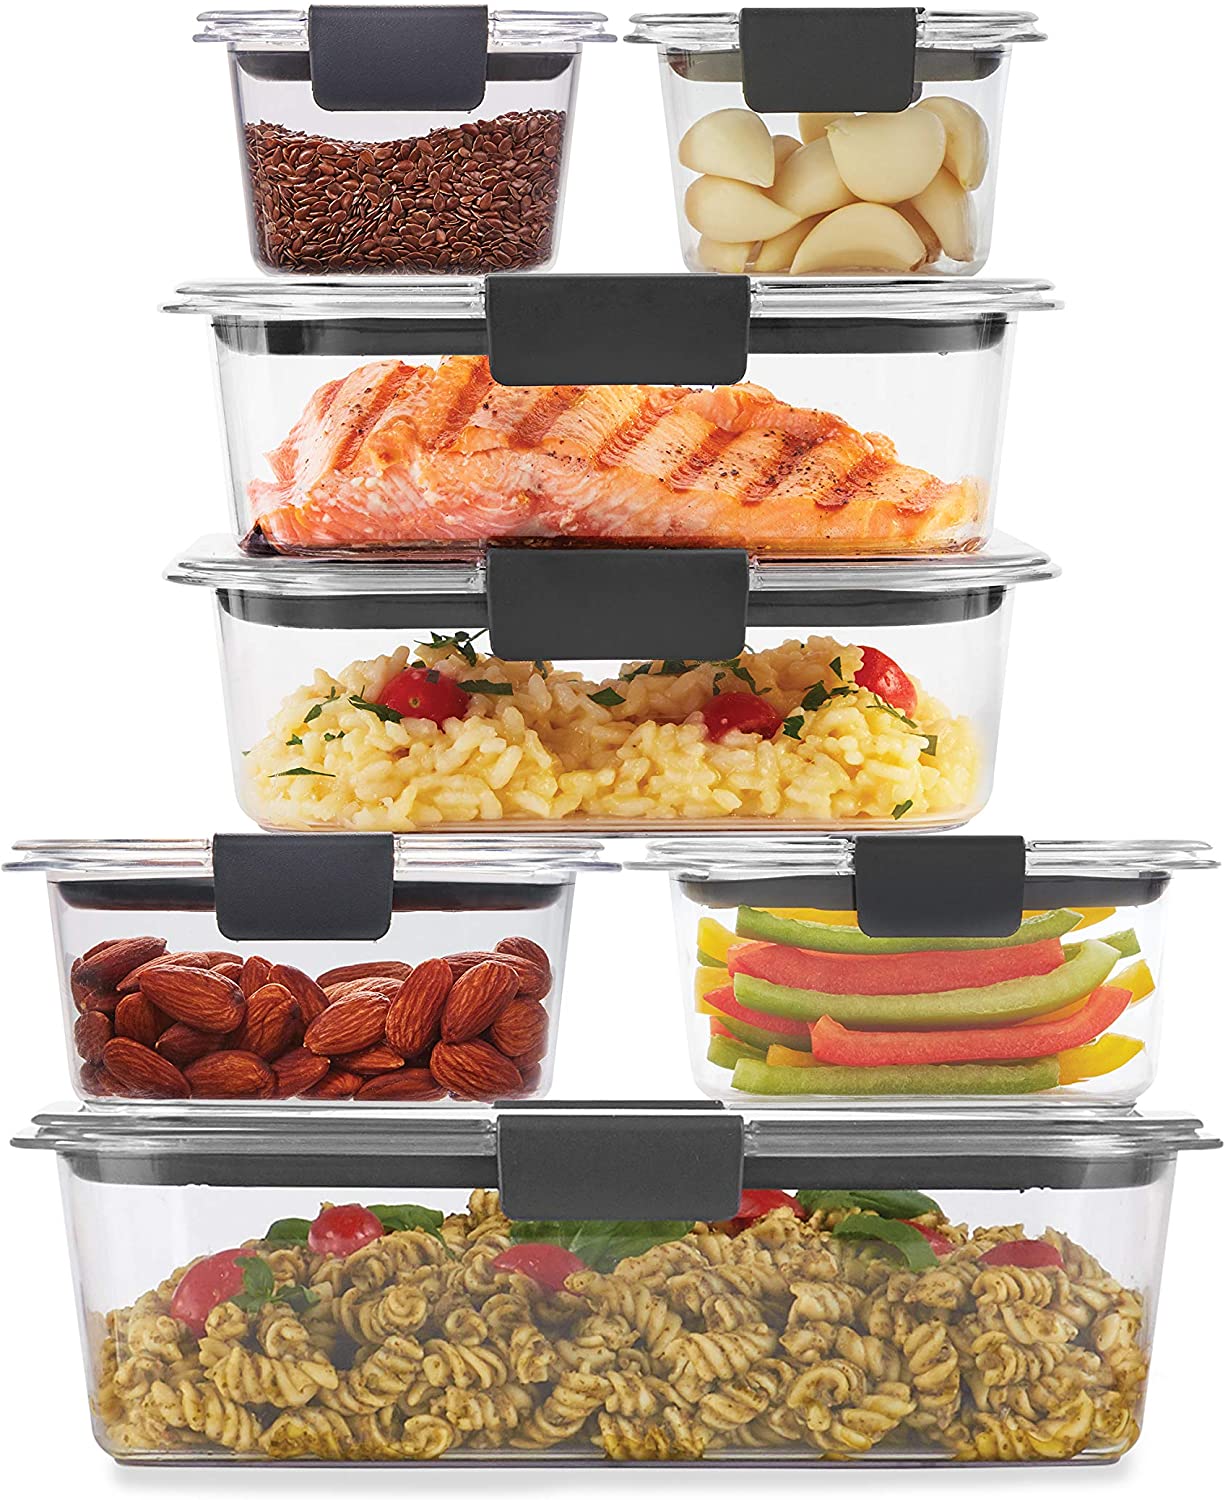 Rubbermaid Brilliance 360-Degree Clarity Food Storage Containers, 14-Piece